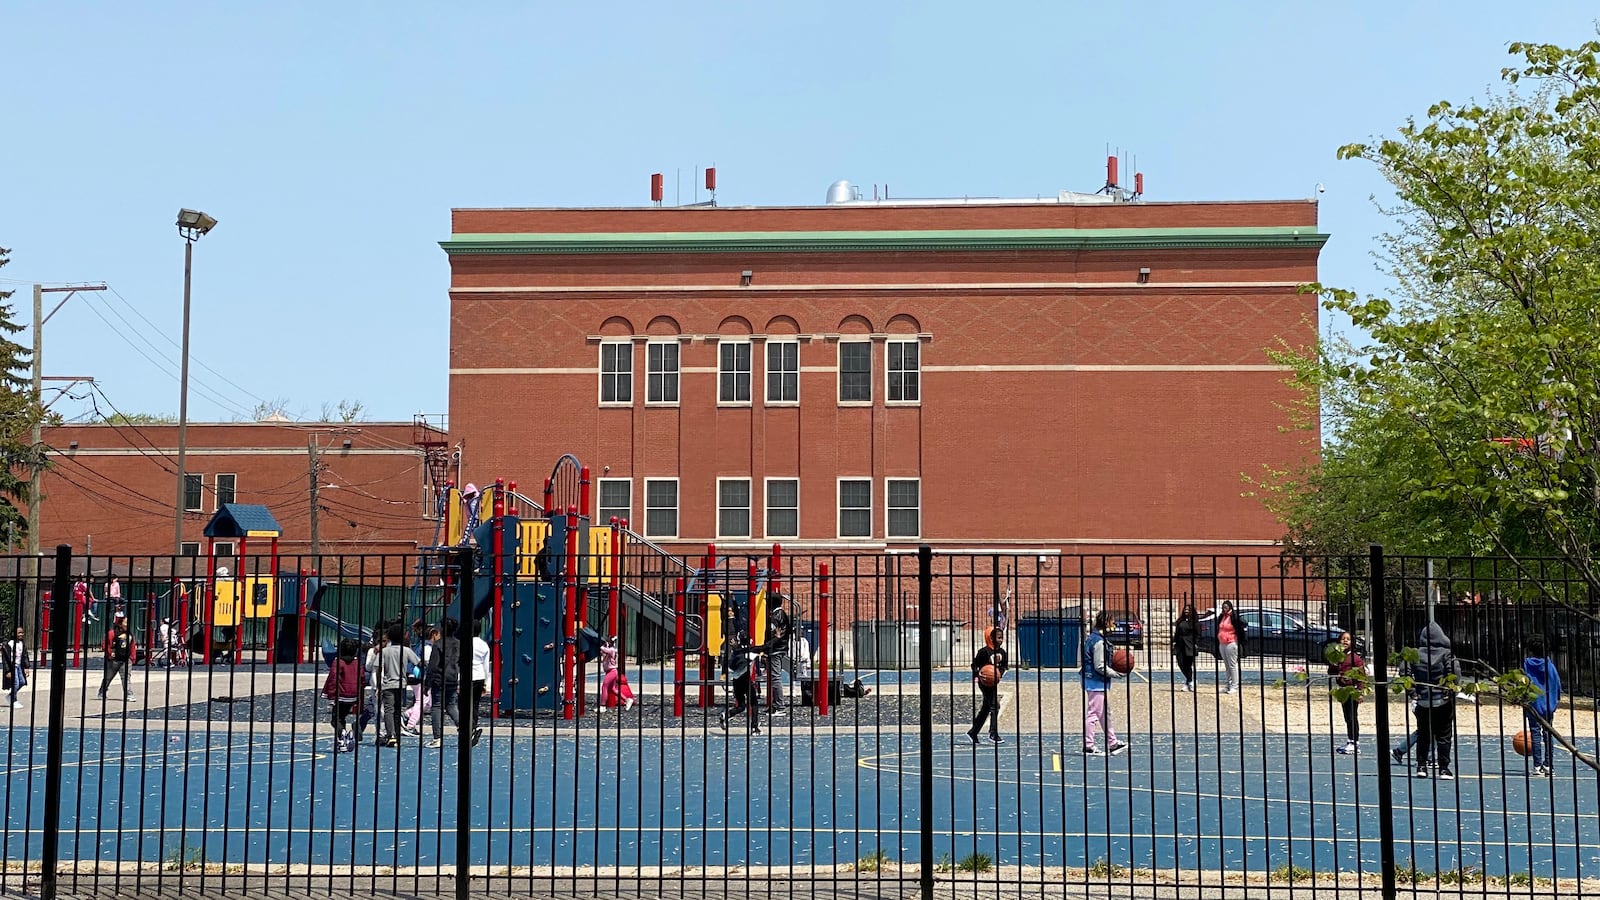 Behind a large fence, a group of young students play on a school playground with a large red brick building in the background.